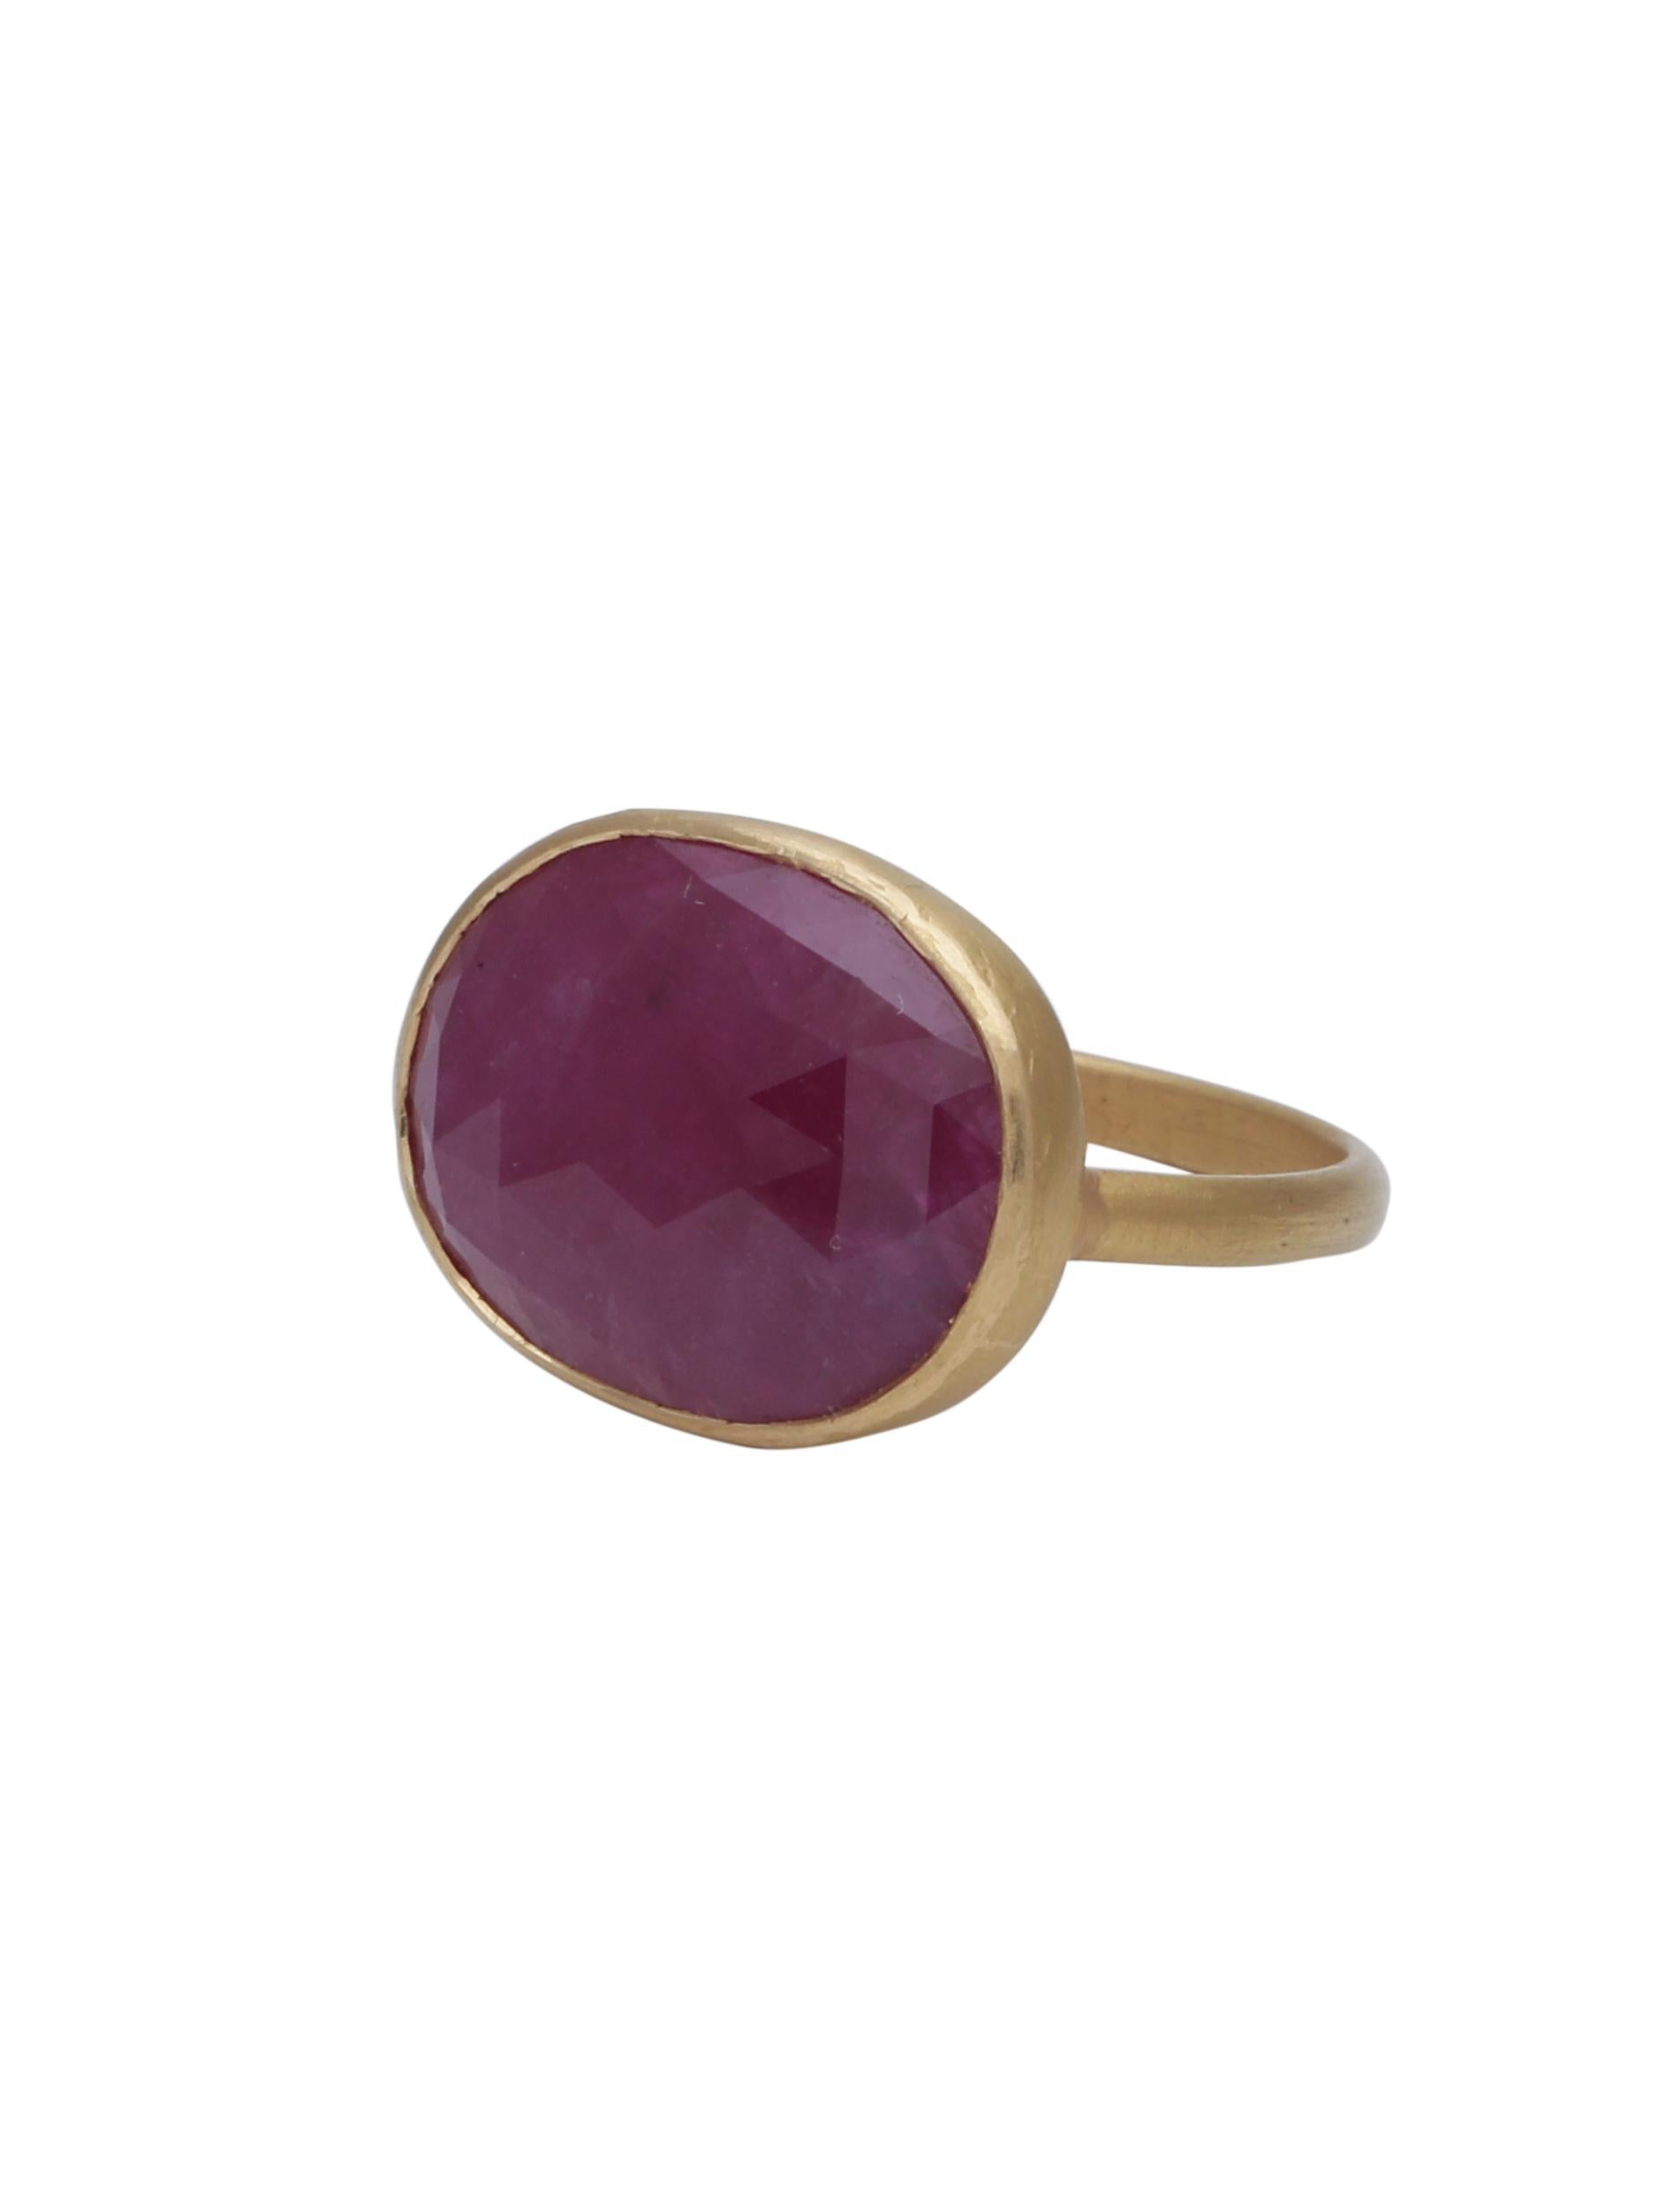 A Handmade ring in 22K gold with a 8cts natural Oval Cut Ruby Centre.
To highlight the colour of the Ruby we have made the ring in Matte Finish that gives it a handmade look aswell and is also the pure color of gold.

Ring Size: US7

